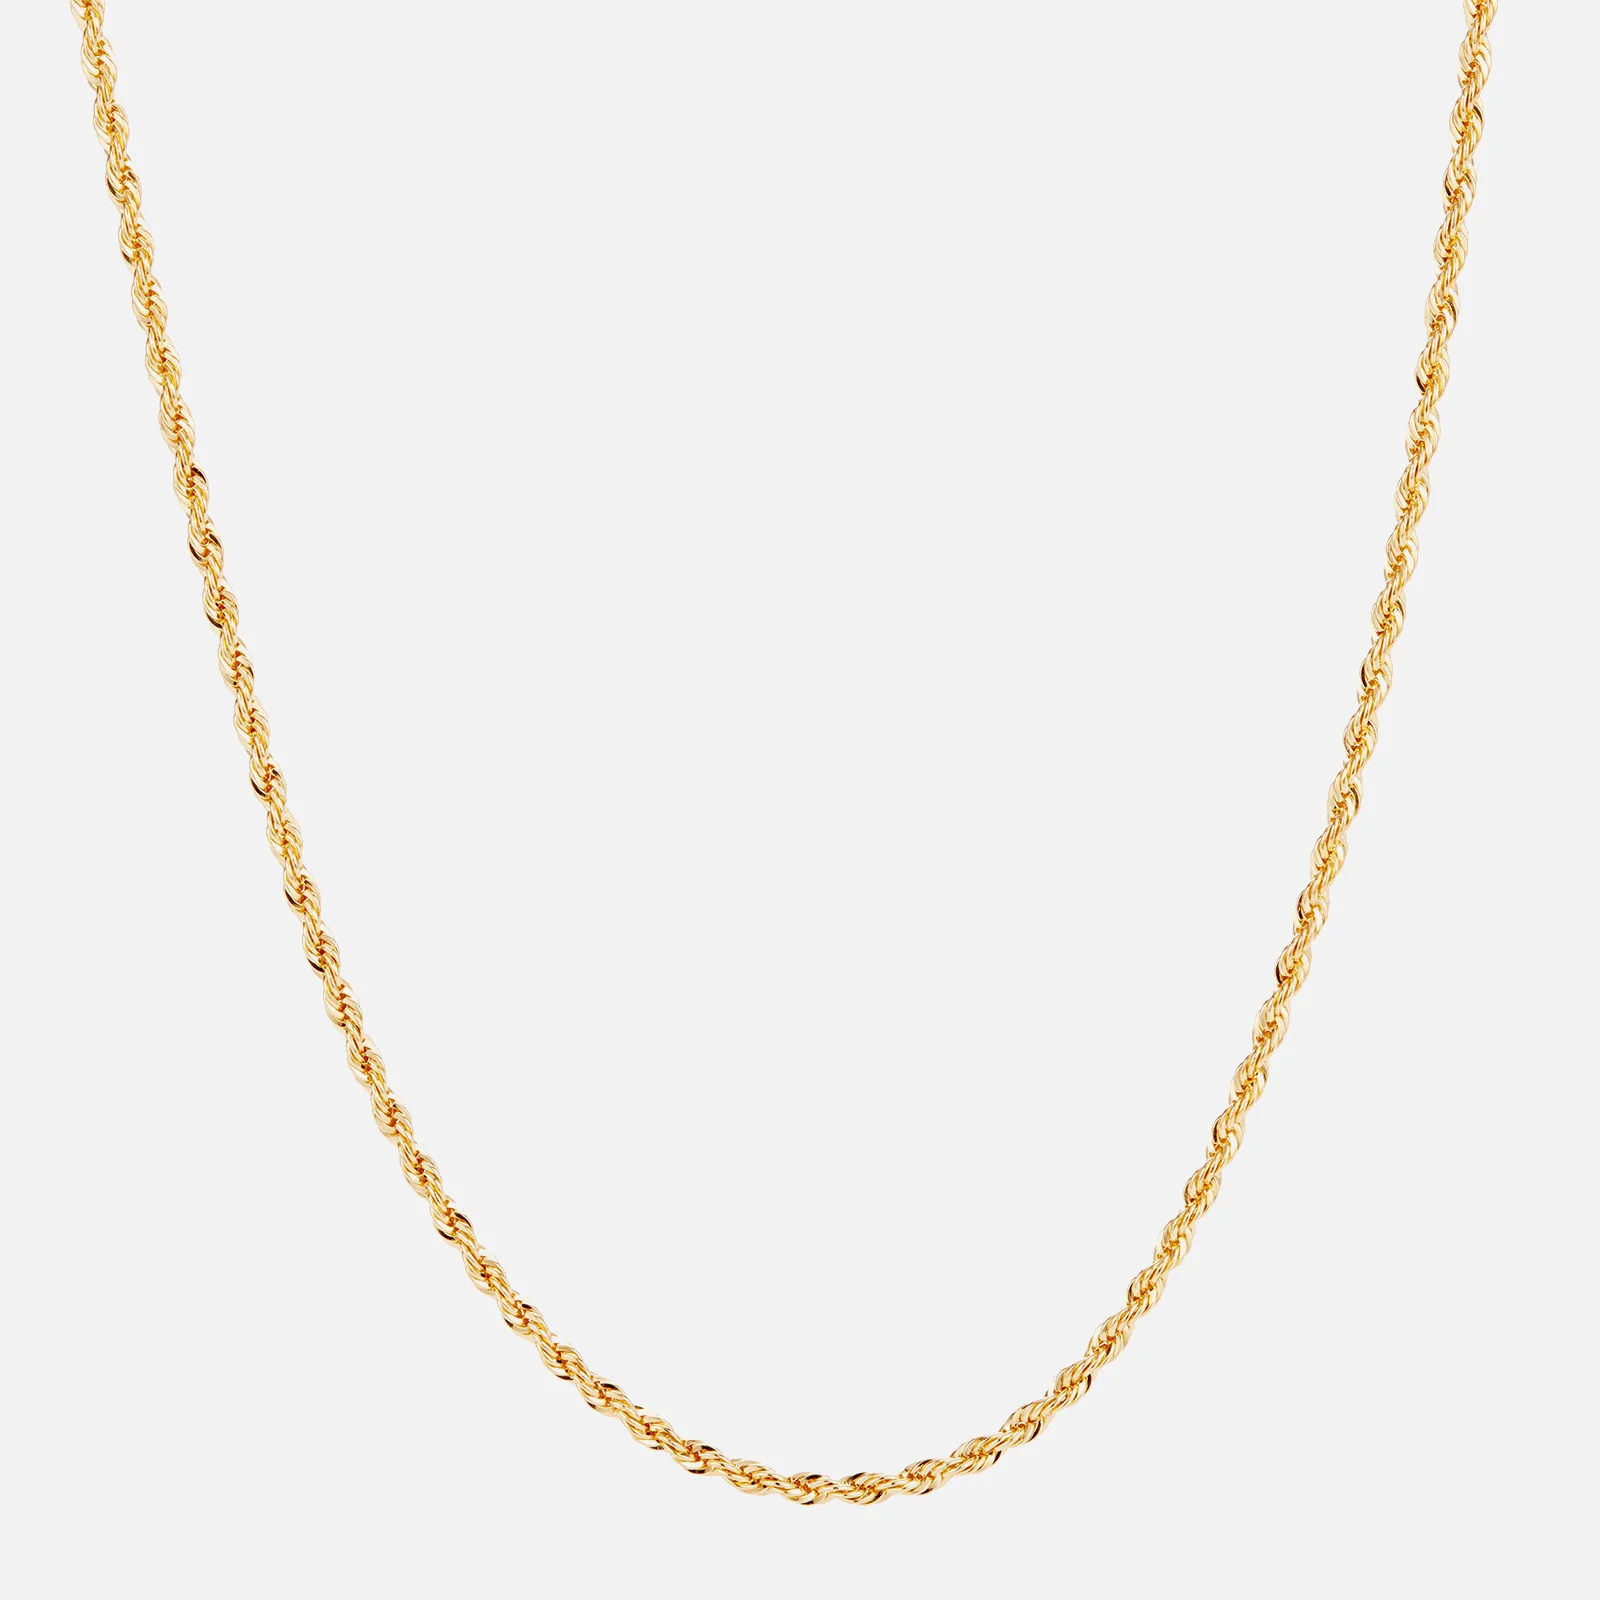 Crystal Haze Women's Rope Chain - 50cm - Gold Image 1